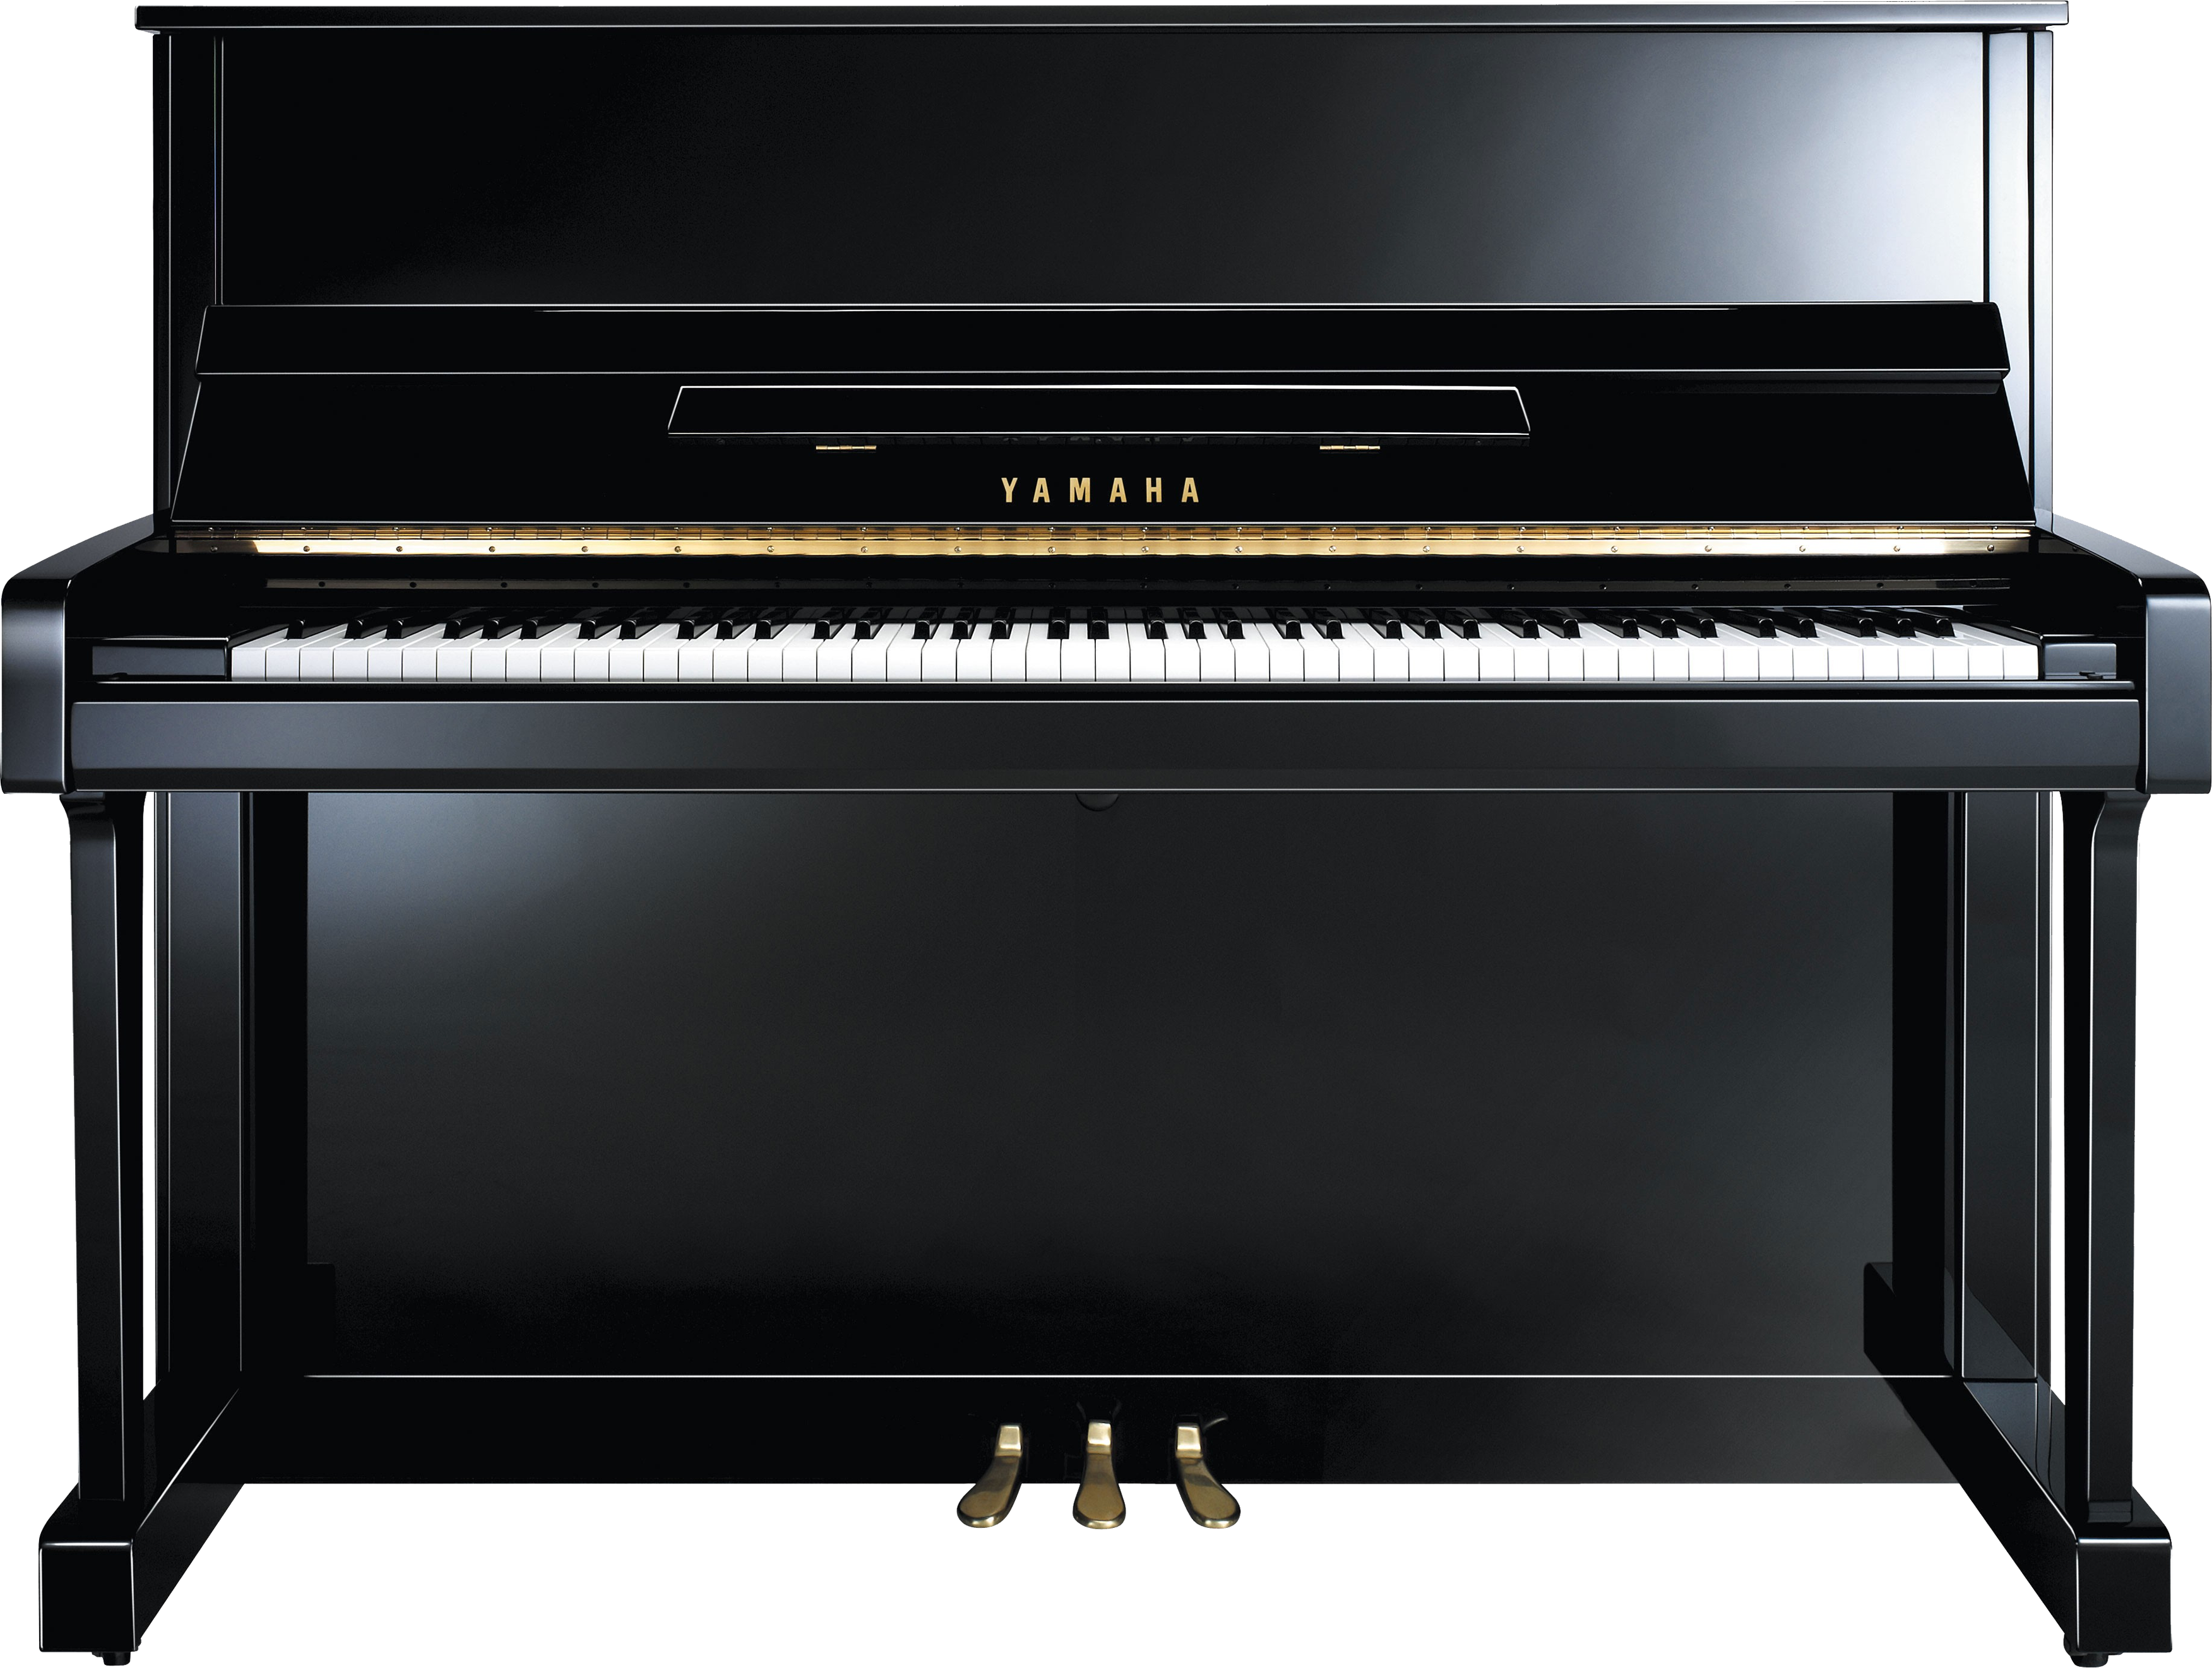 Piano Black PNG Image in Transparent